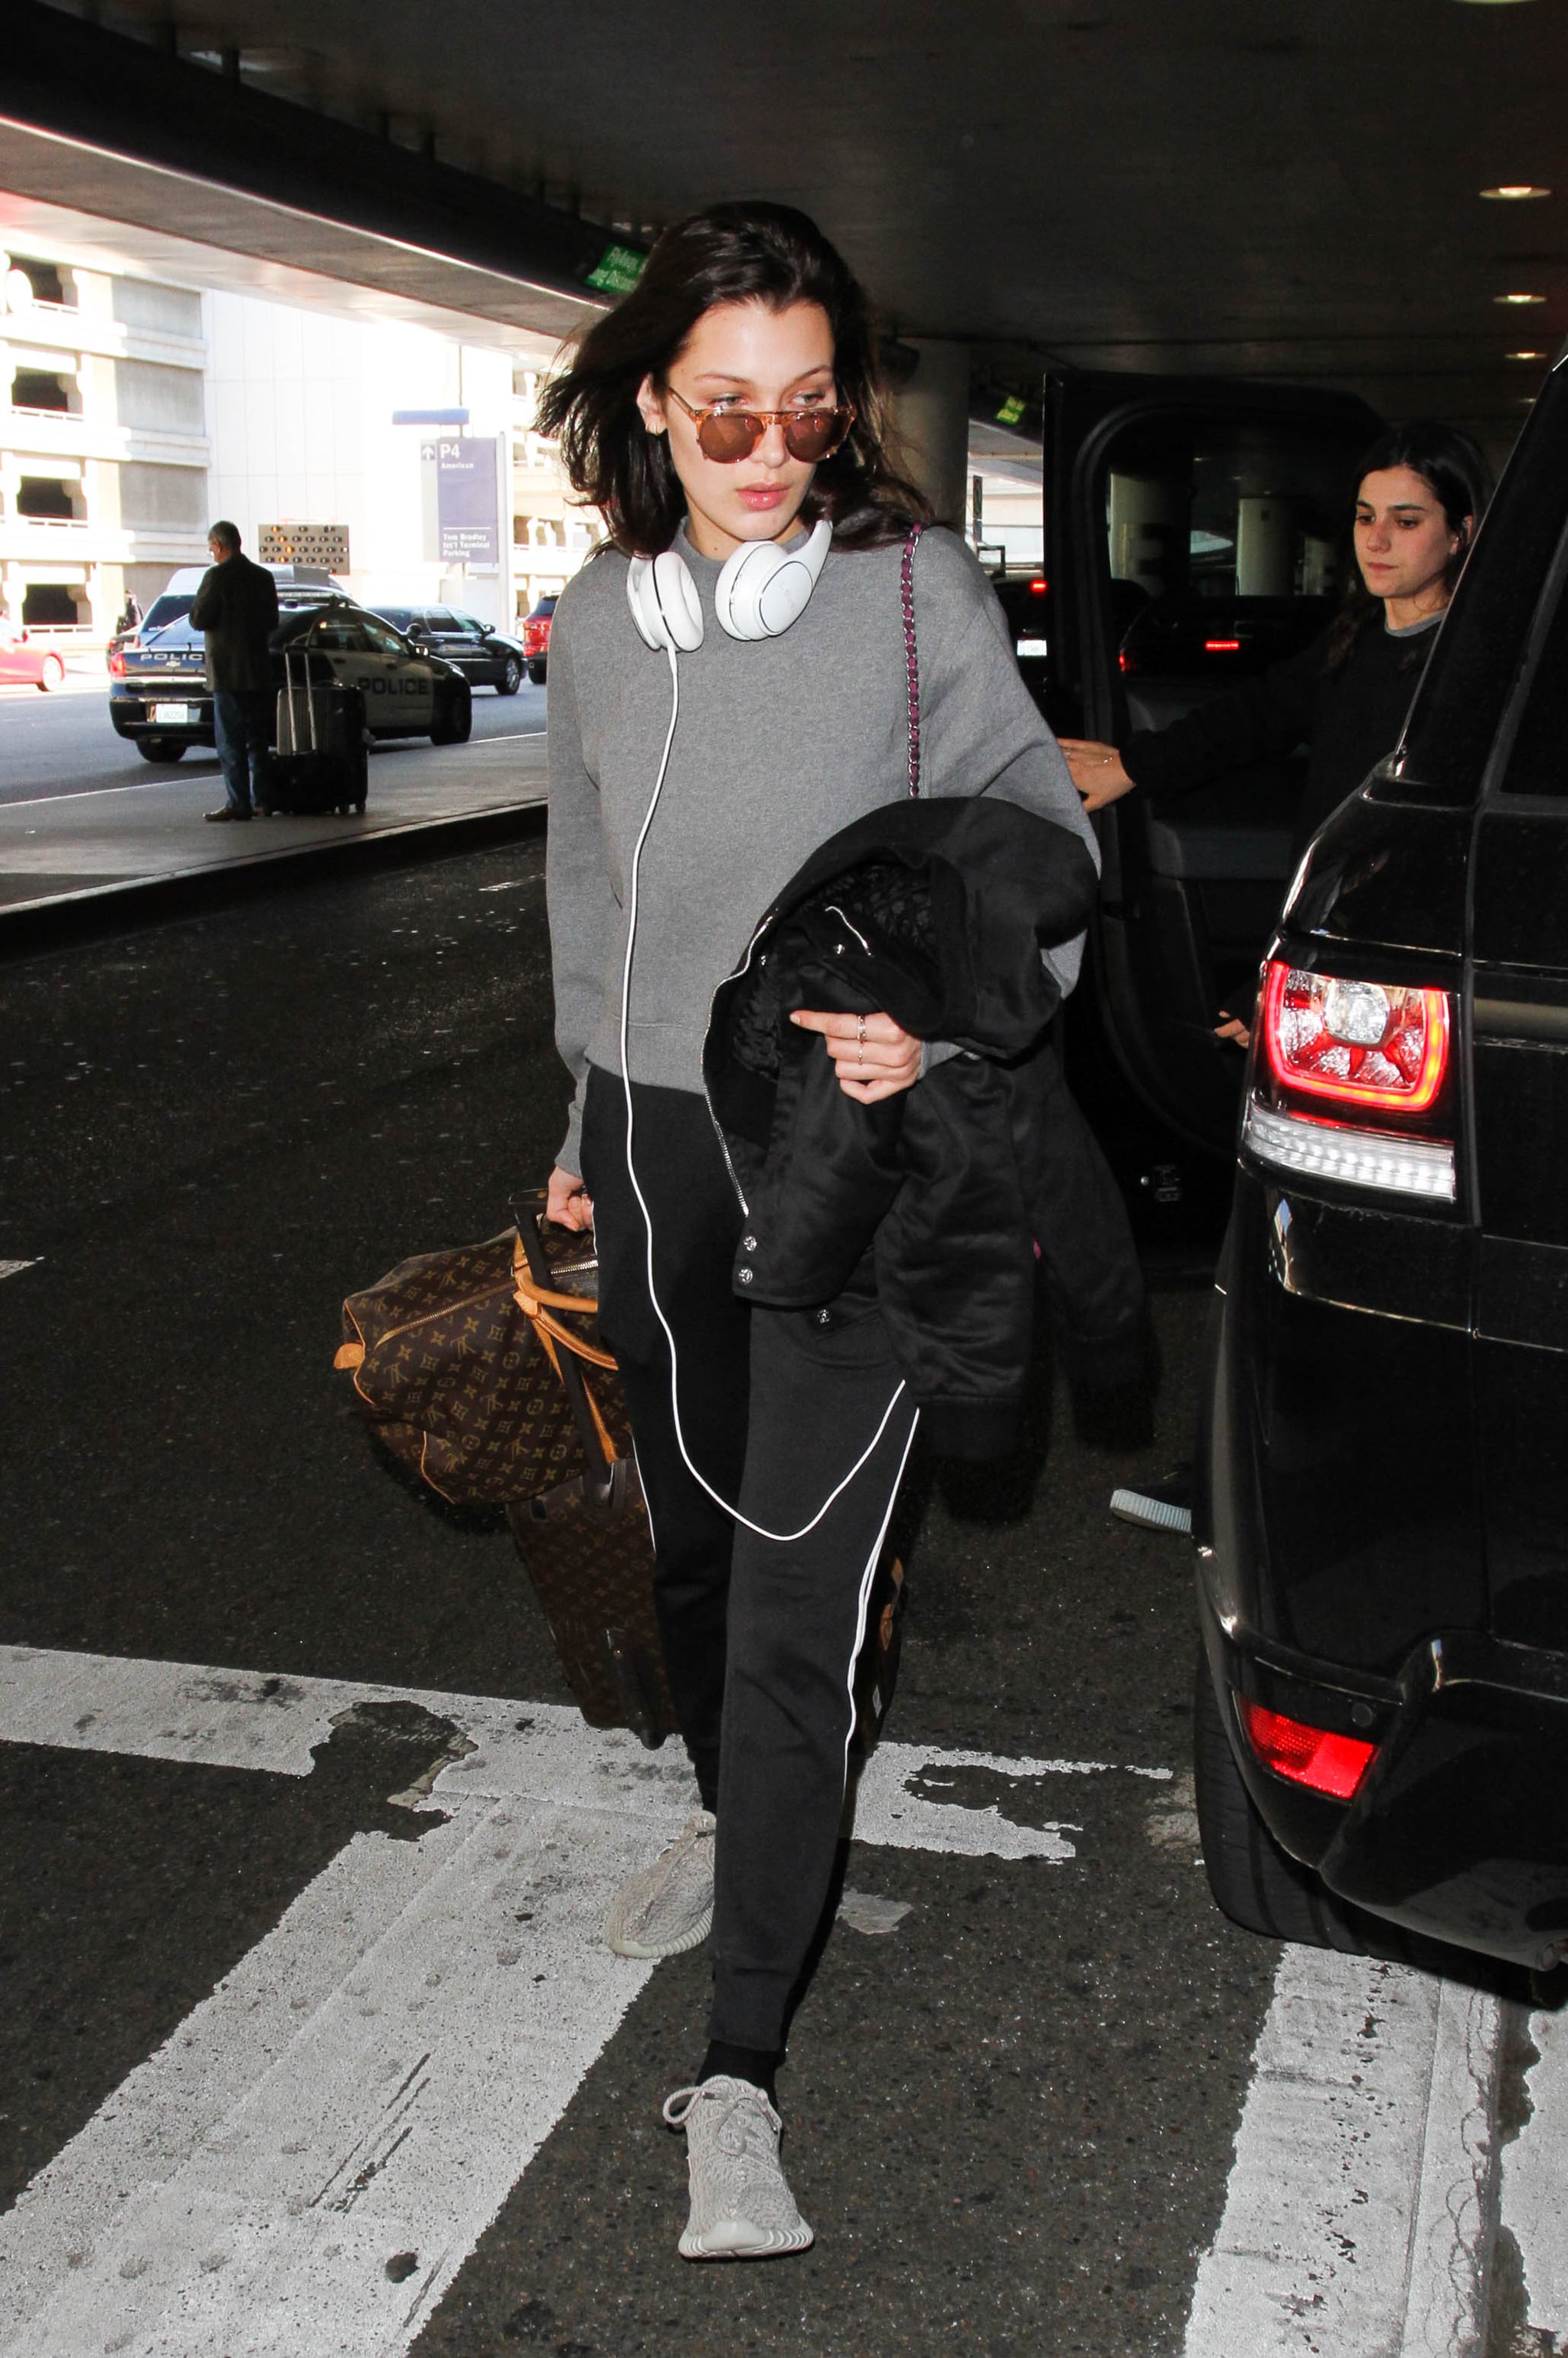 Playing up the gray shade of her sweatshirt with Yeezy sneakers